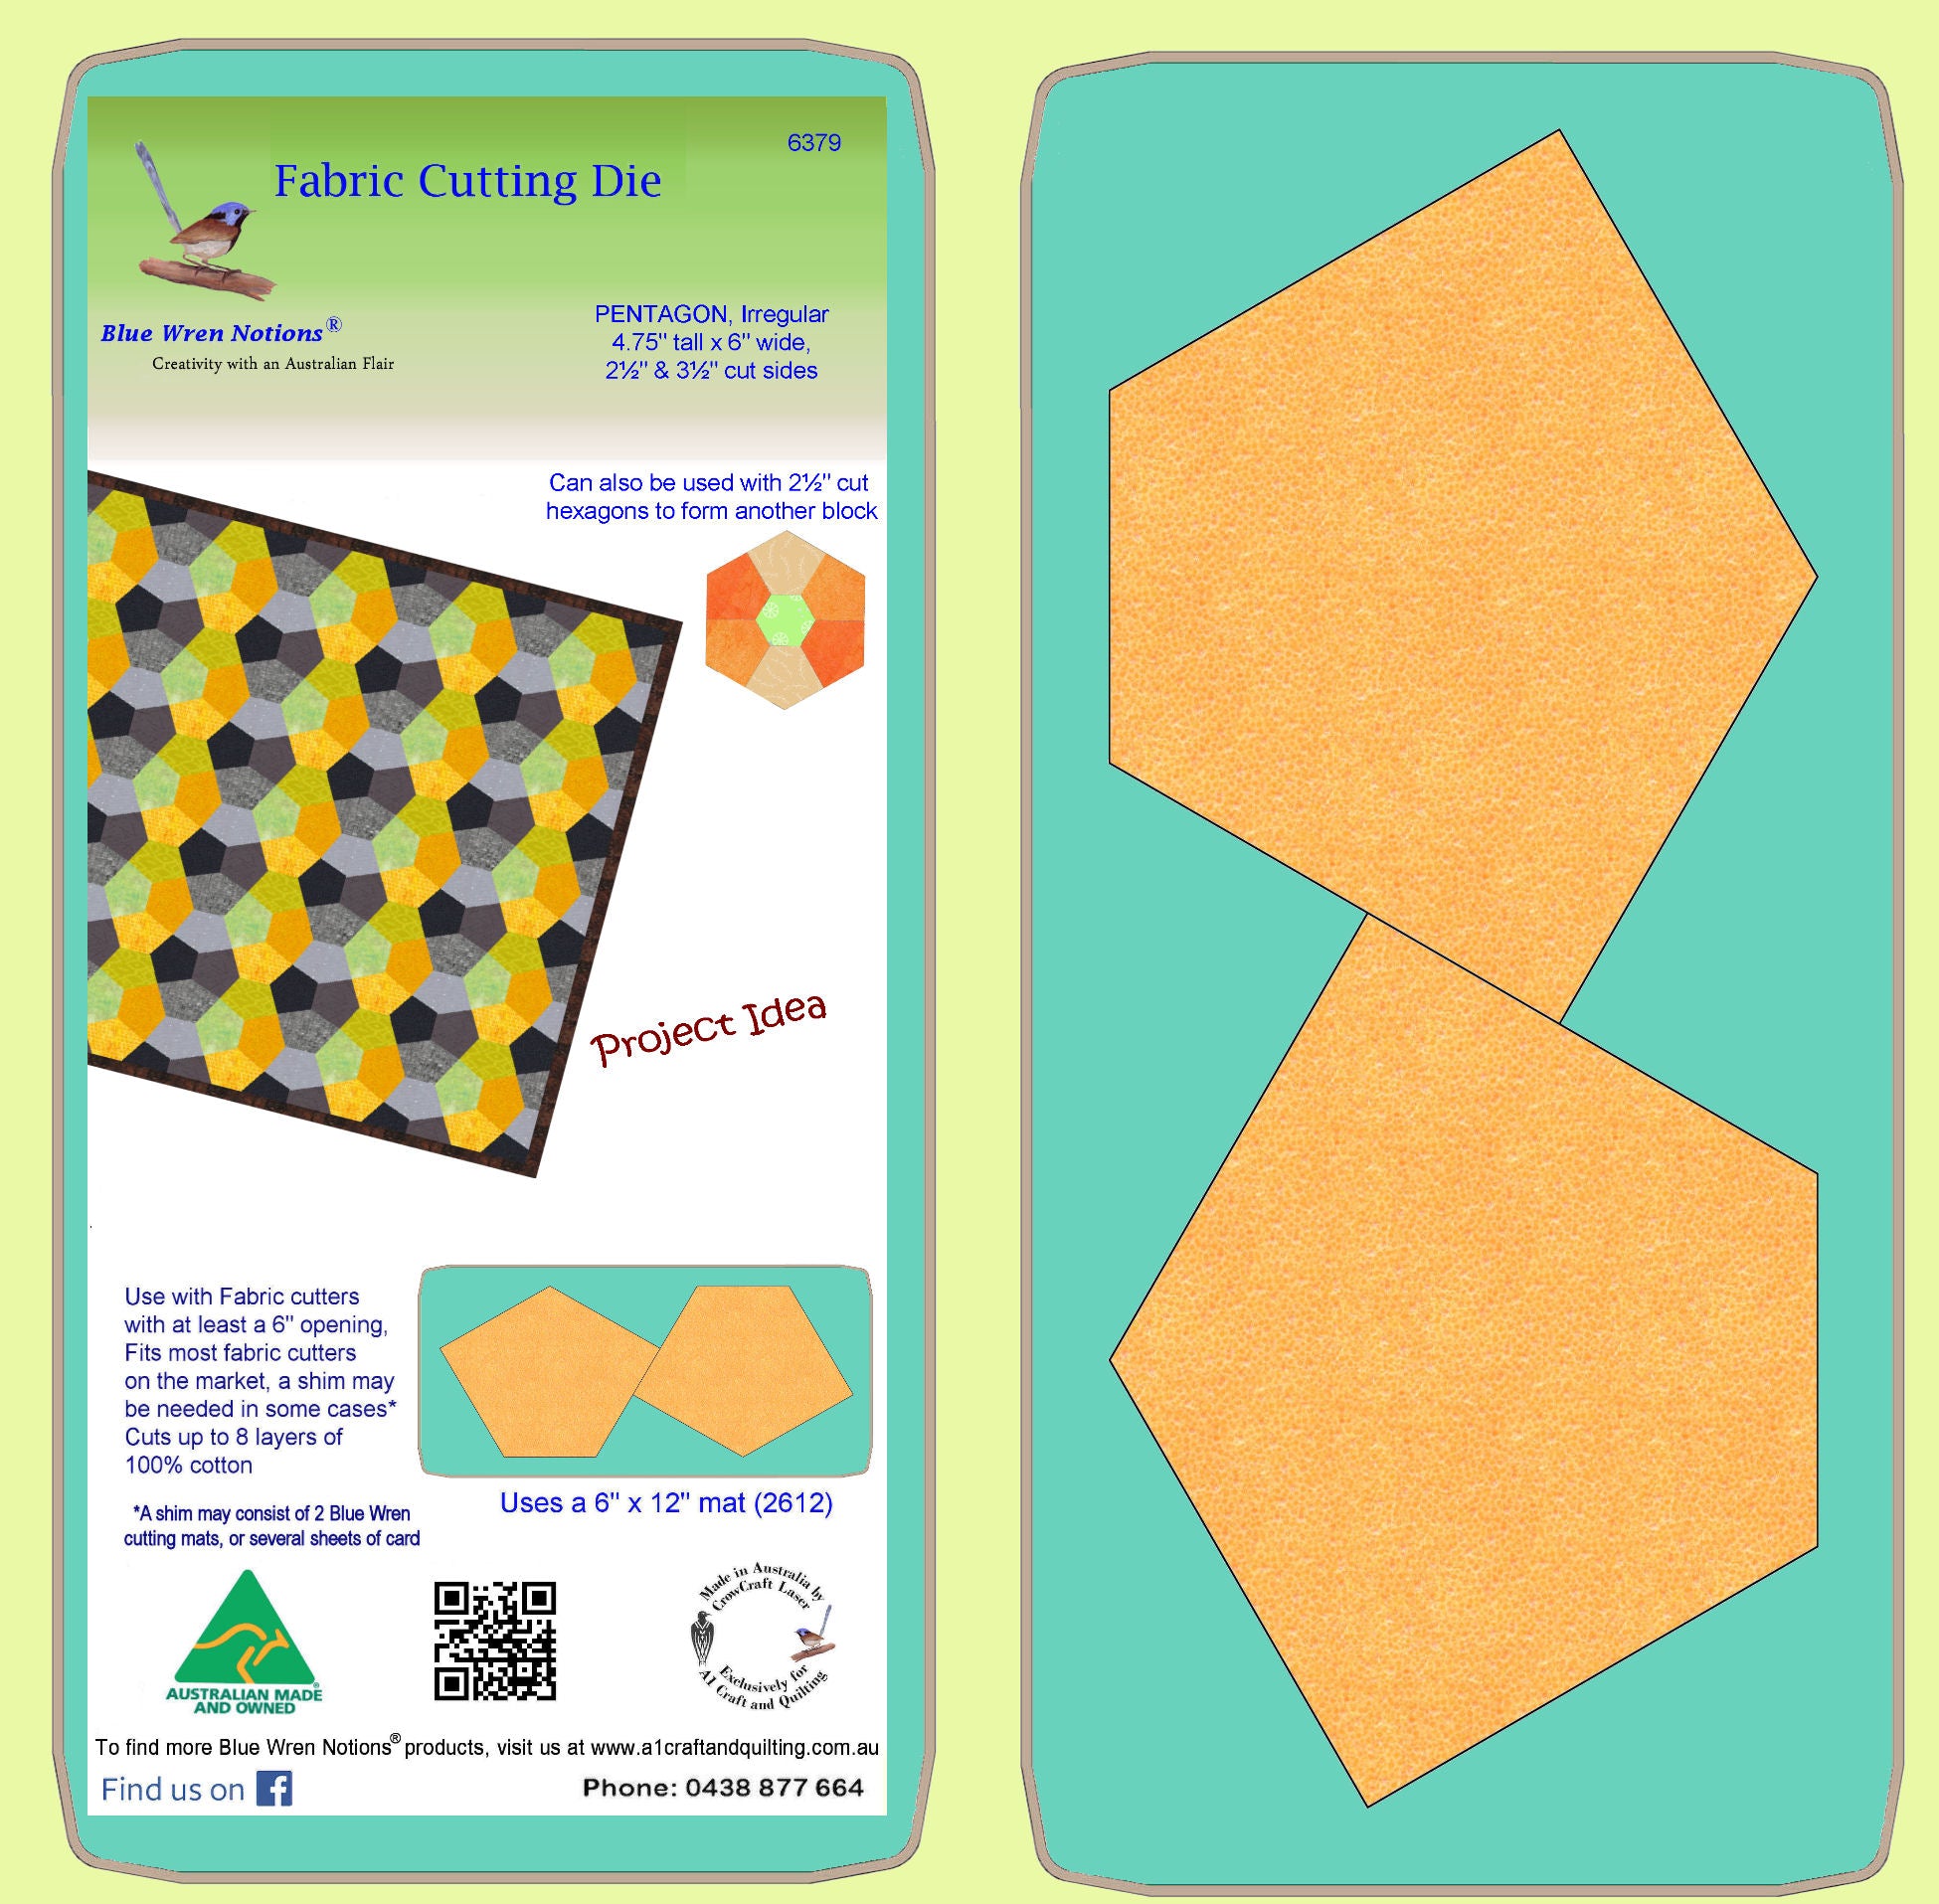 Pentagons, Irregular 4¾" Tall, 6" wide, 2½ and 3½" cut sides 6379 - Includes cutting Mat